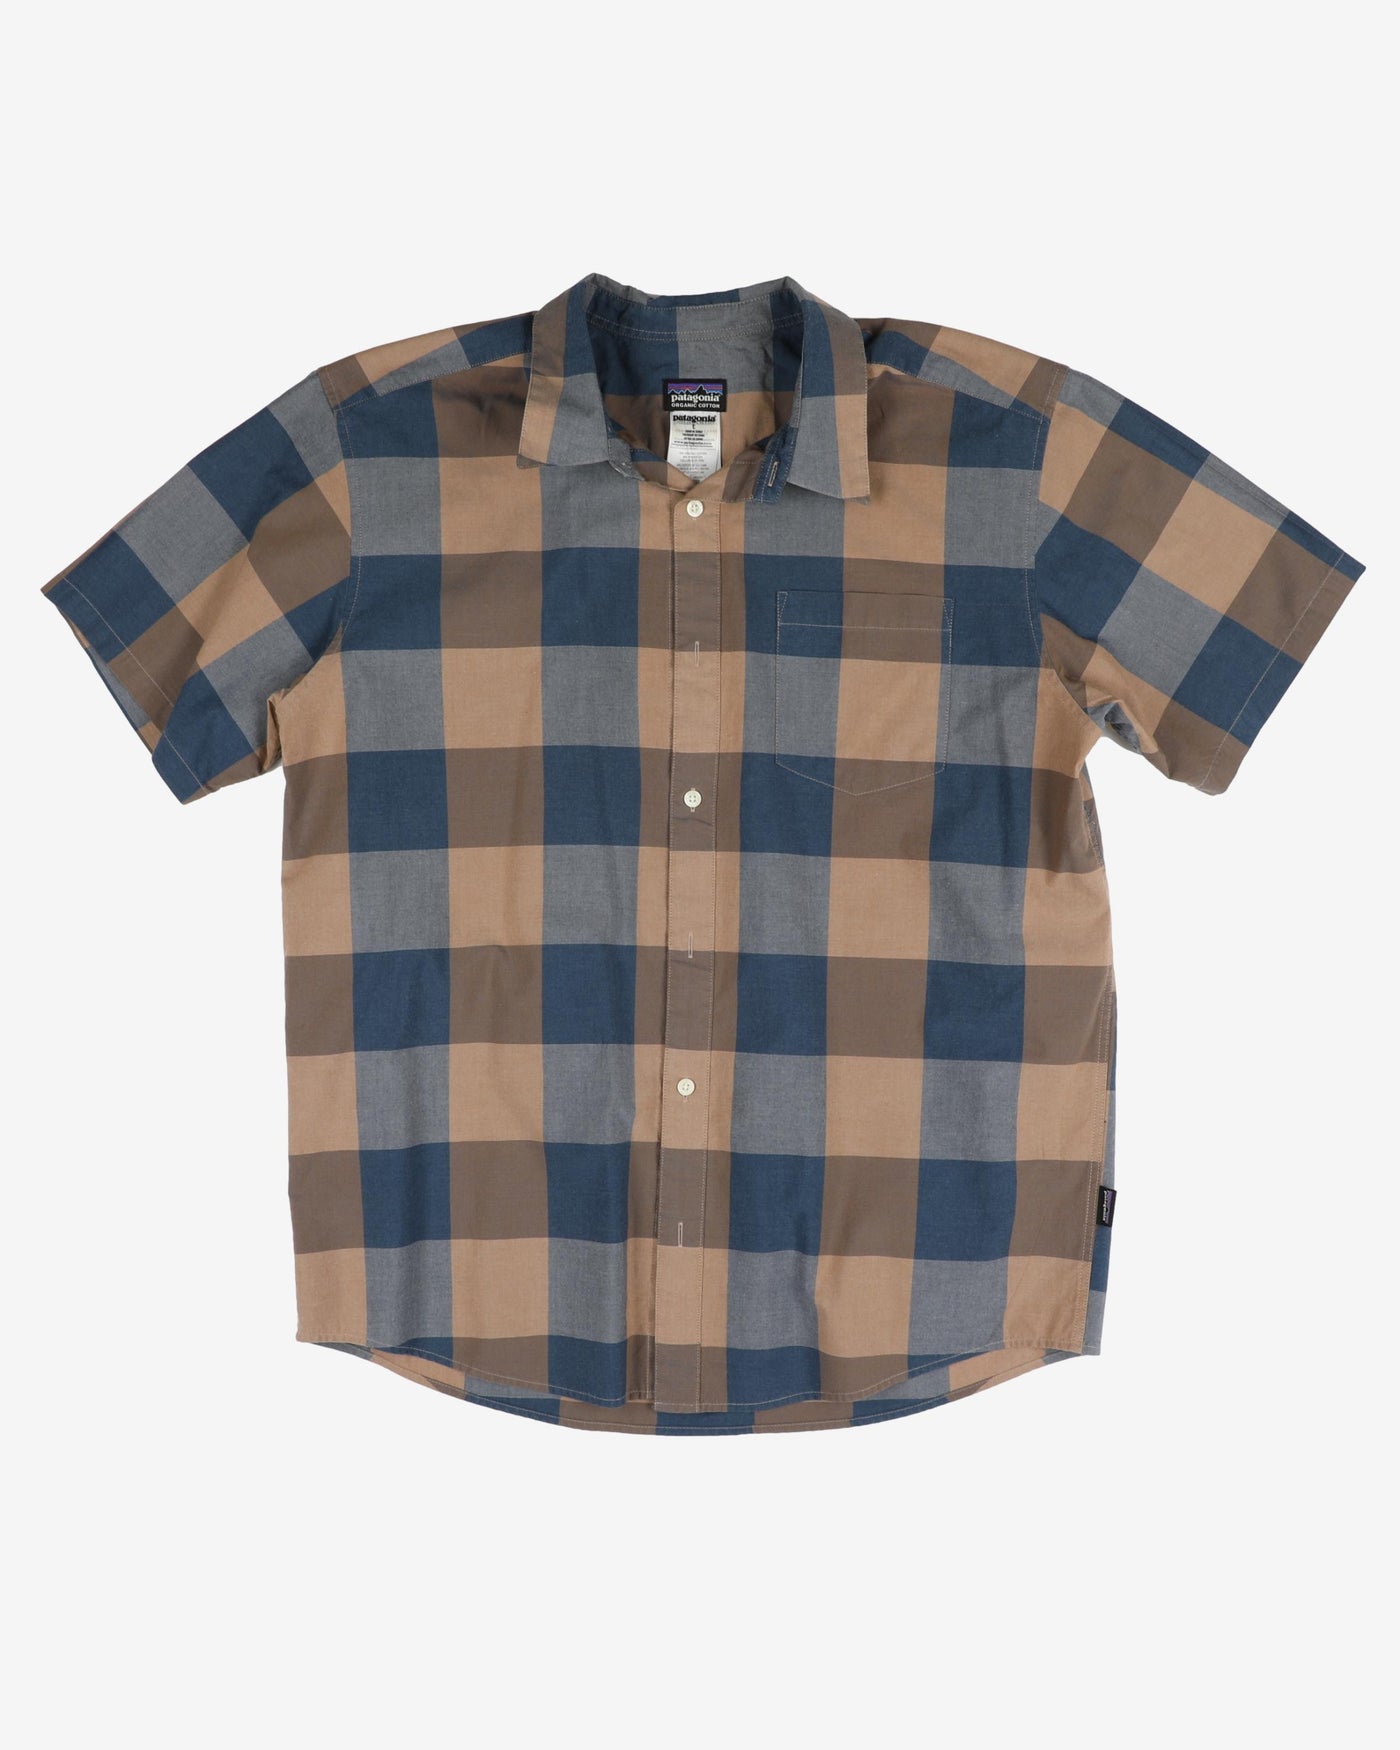 Patagonia Blue / Beige Checked Short-Sleeve Shirt - L